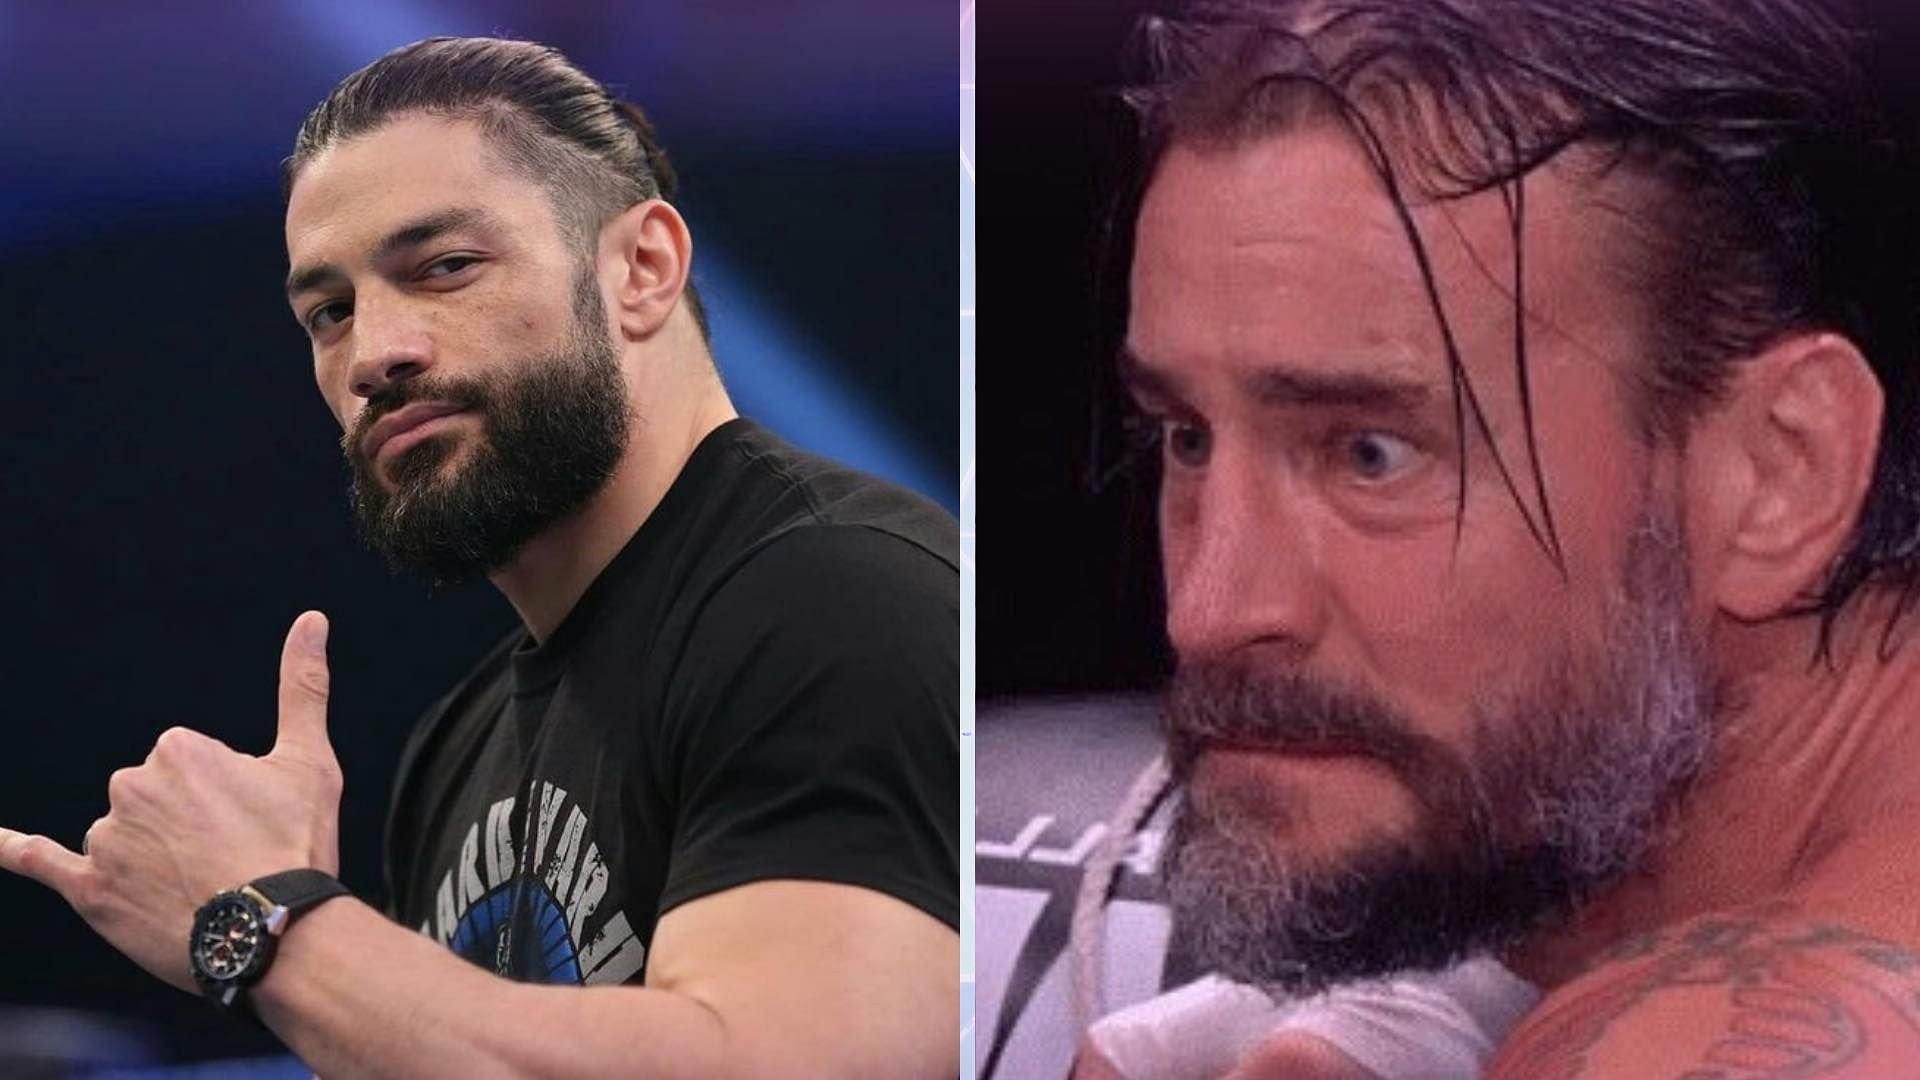 Will fans get to see Roman Reigns face off against CM Punk?